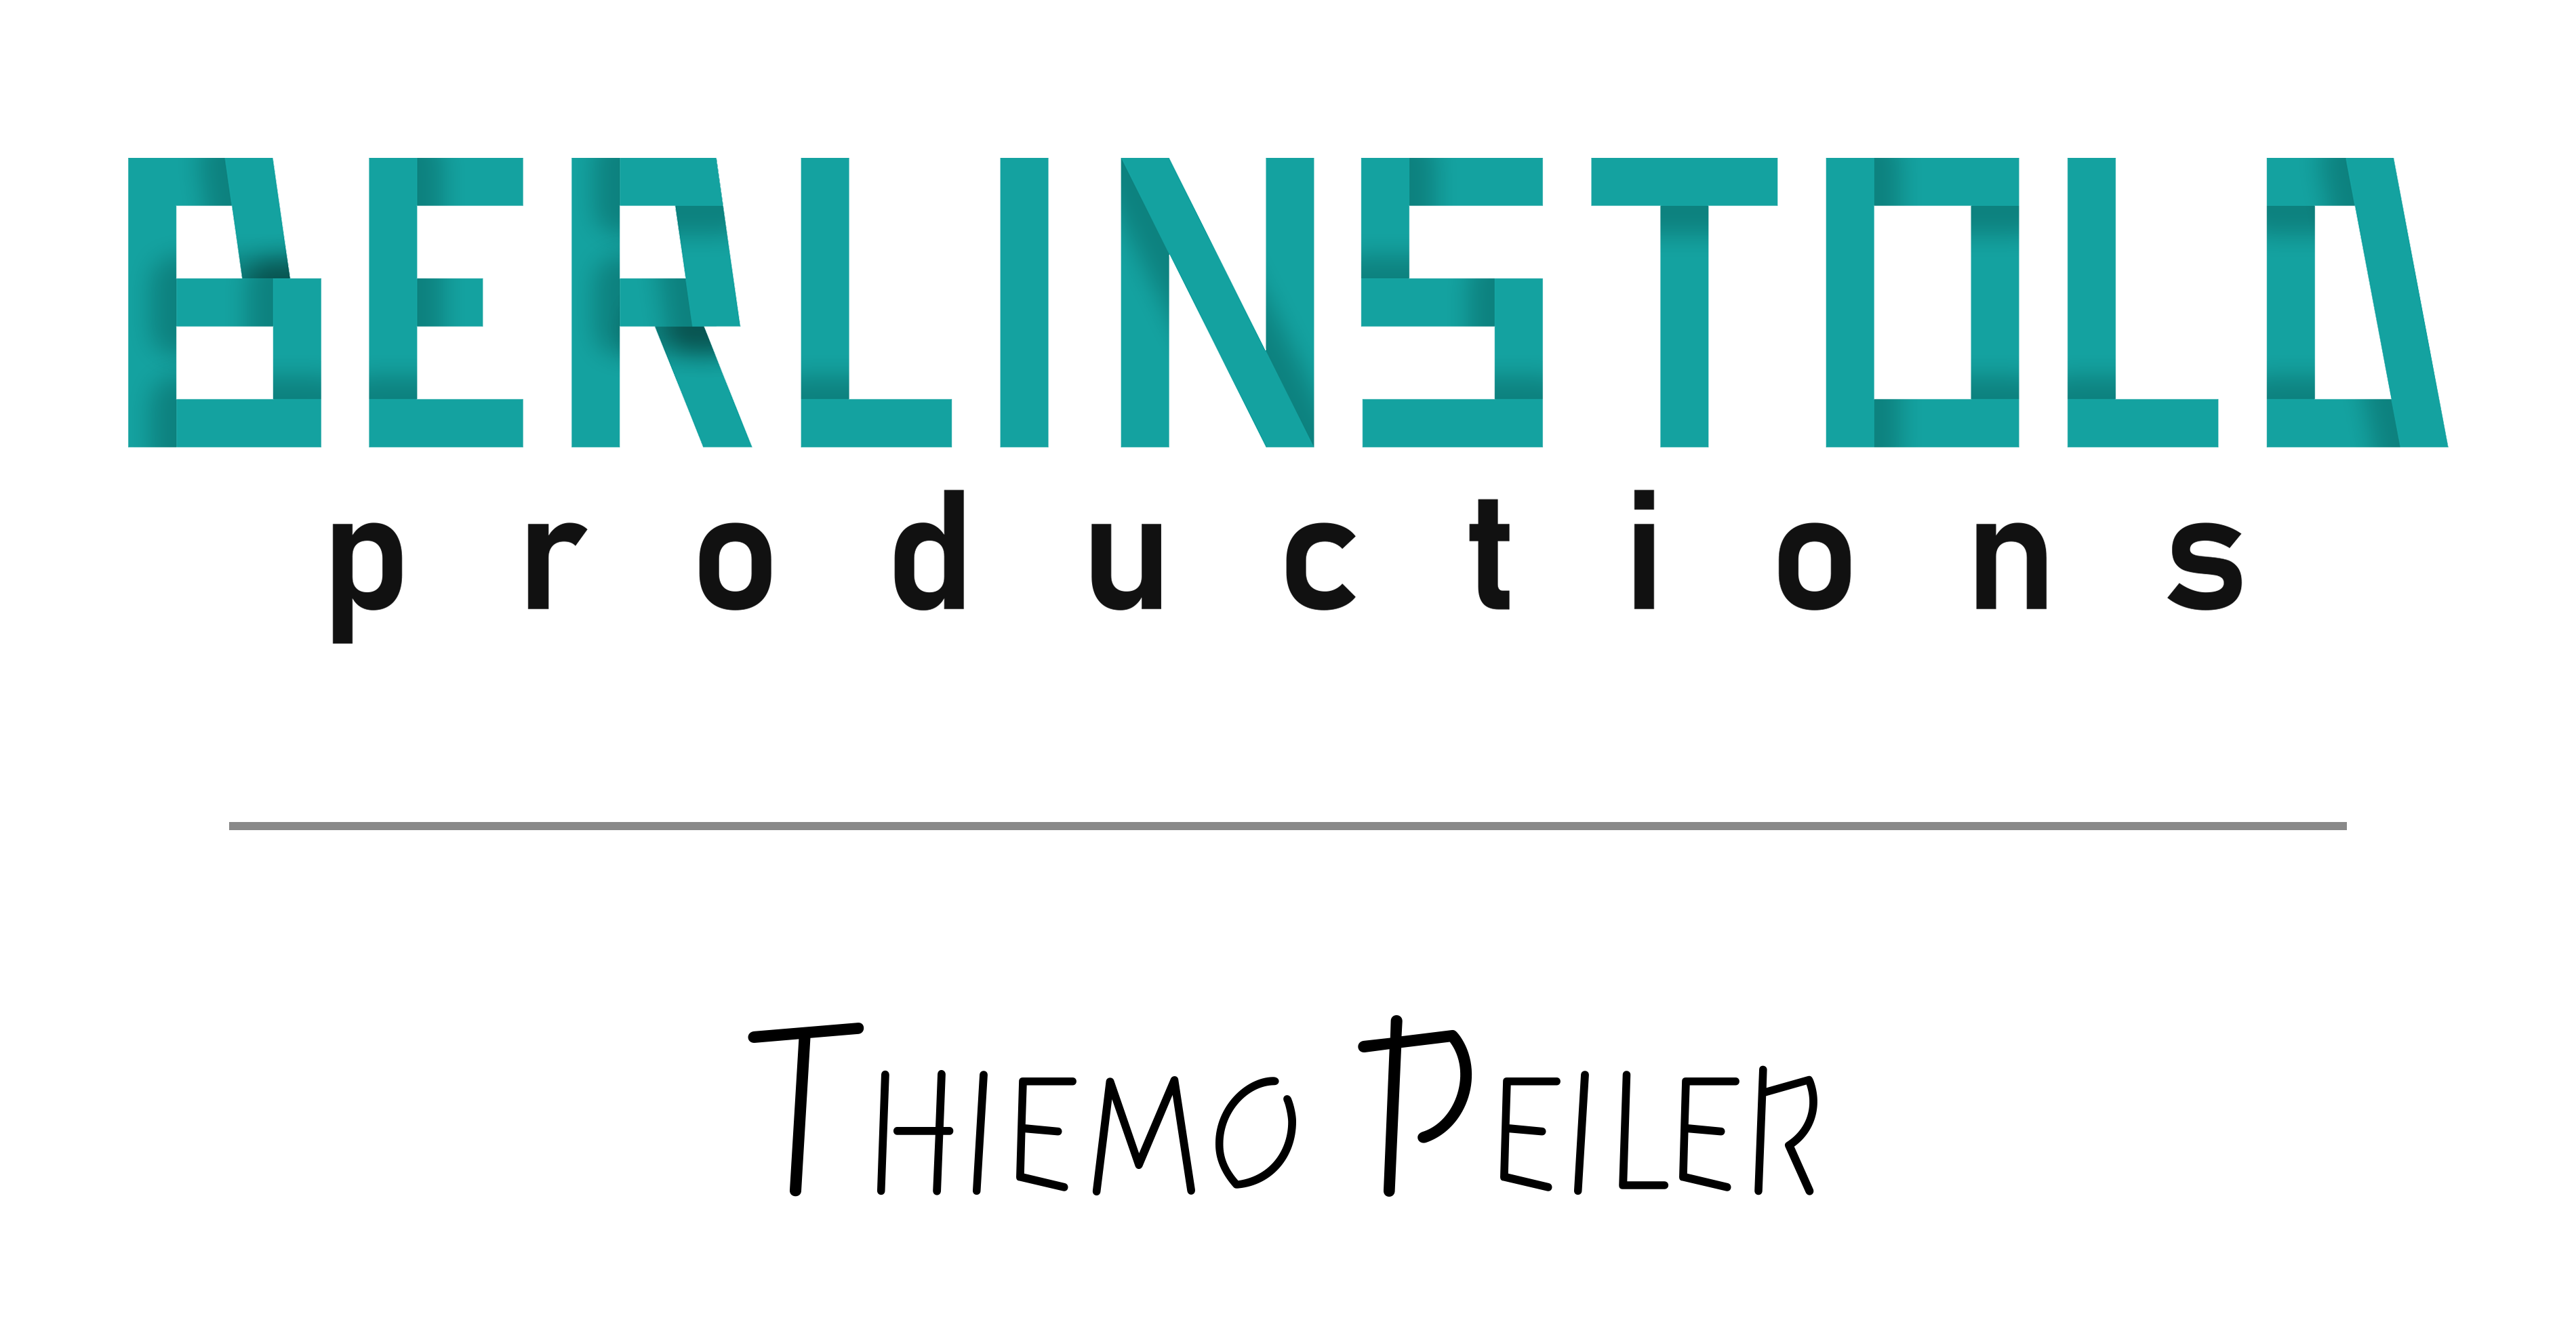 BERLINSTOLD productions